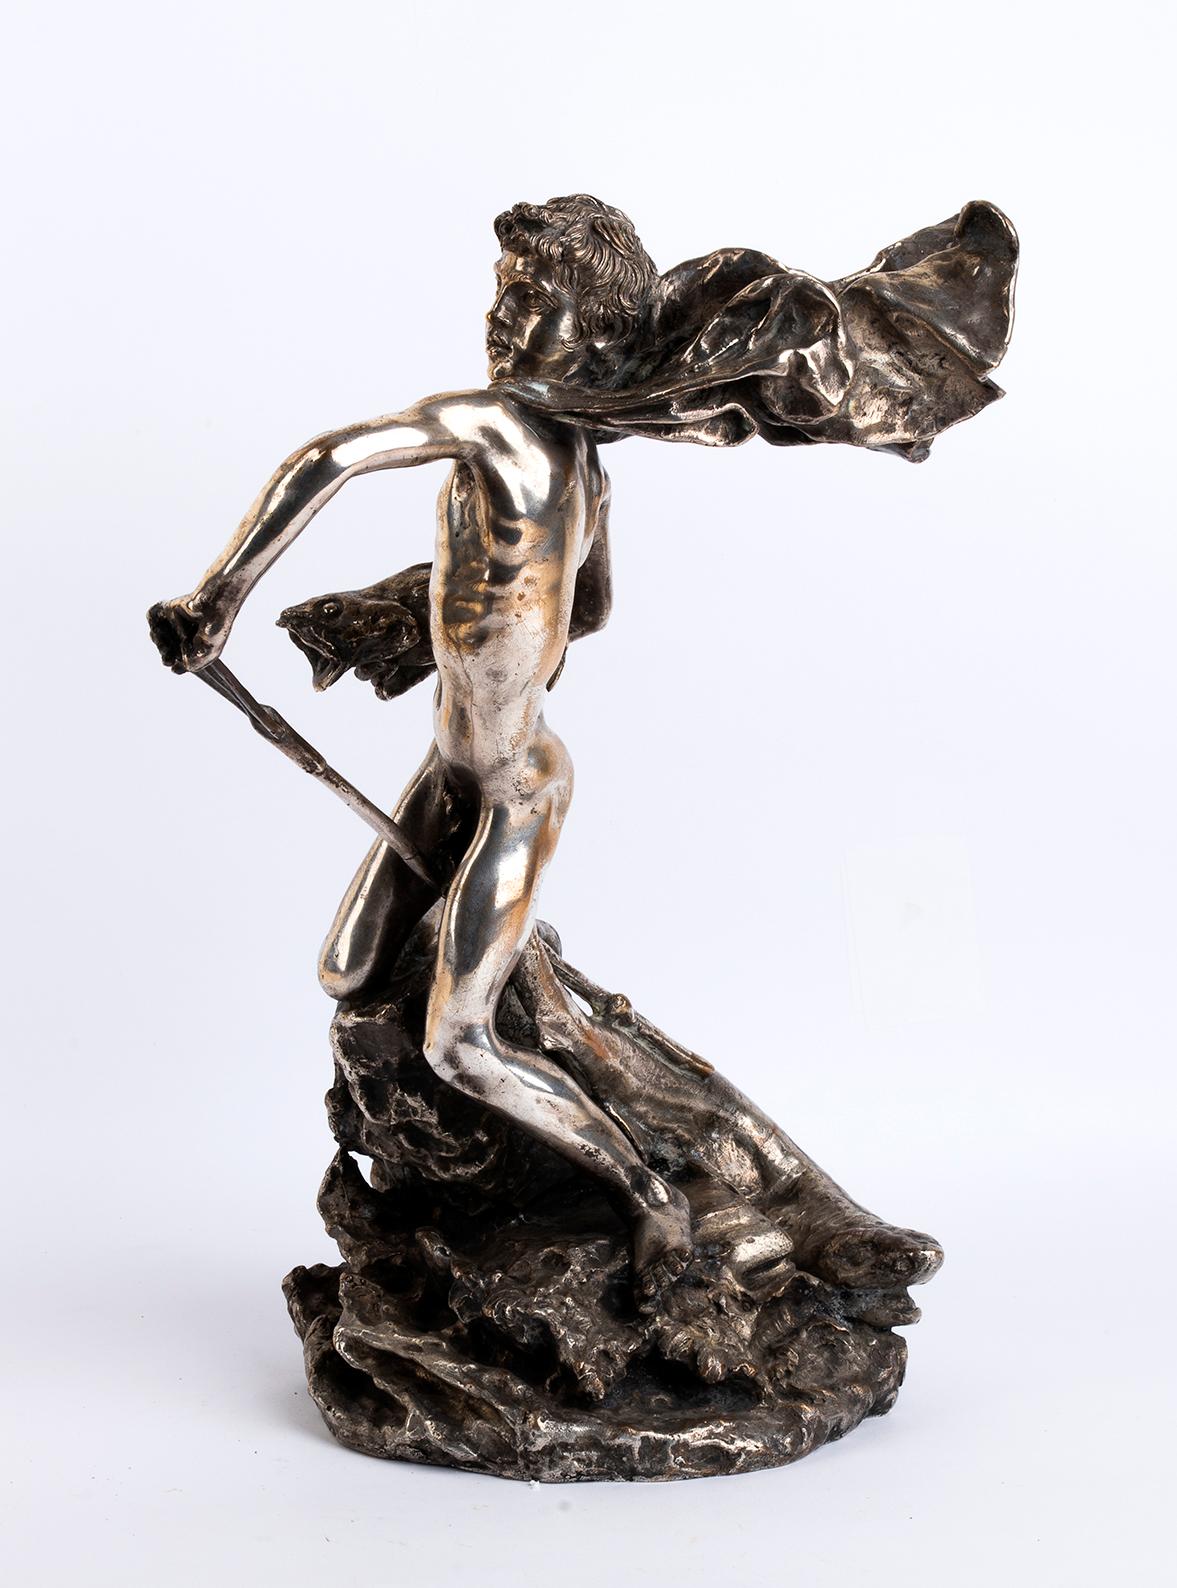 Vincenzo Gemito, (Napoli, 1852 – Napoli, 1929). 
The youth of Neptune.

Silver plated bronze sculpture. 
Measures: H 31 cm
W 17 cm.